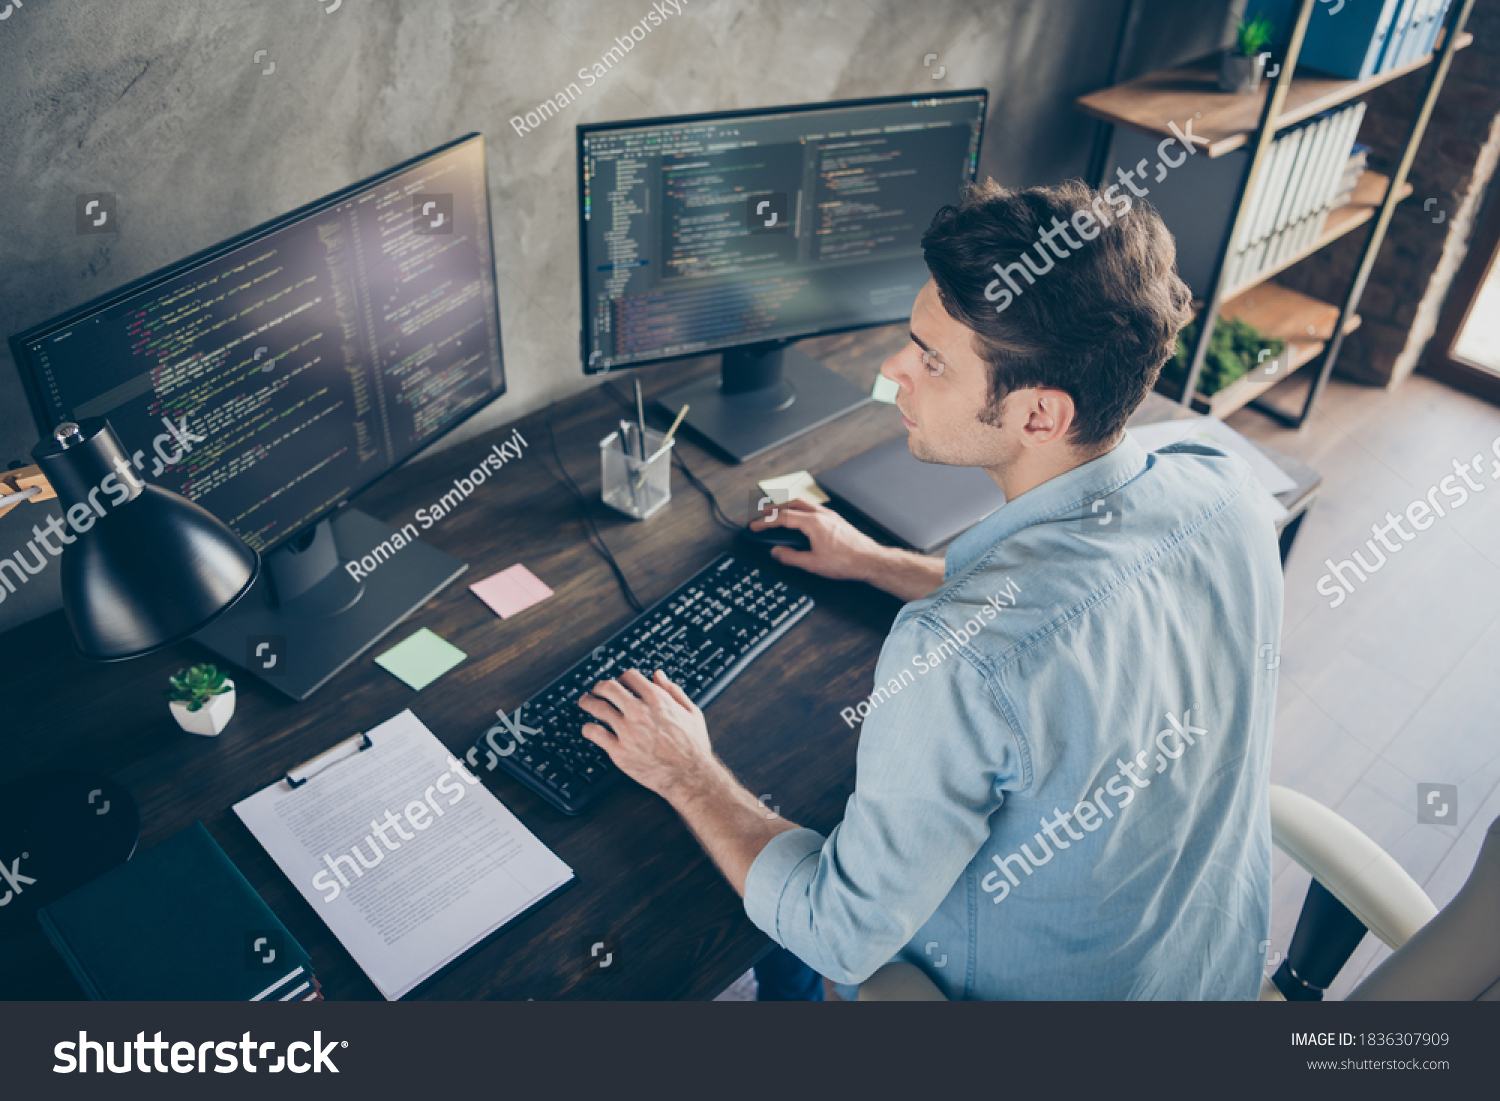 Top above high angle view portrait of his he nice attractive focused skilled geek guy typing bug track report cyberspace security at modern industrial interior style concrete wall work place station #1836307909